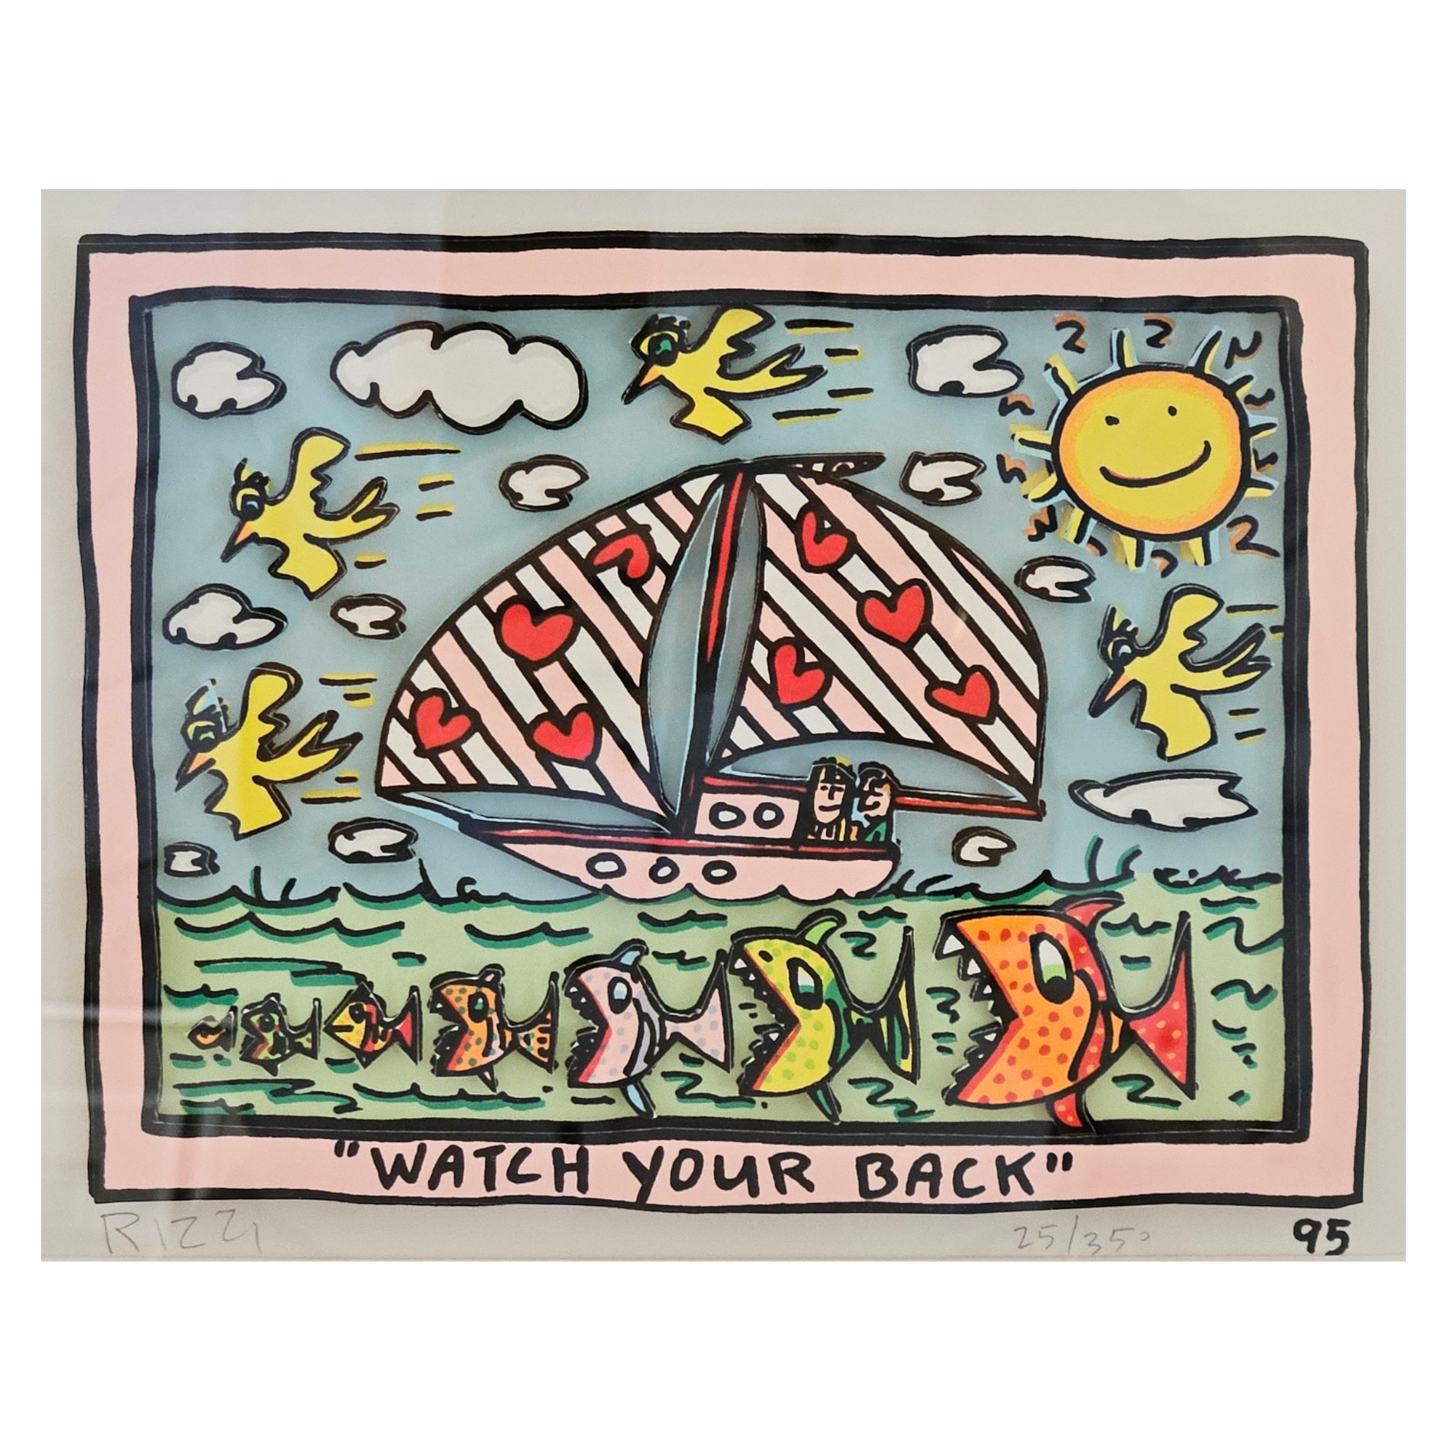 James Rizzi - Watch Your Back (1995)